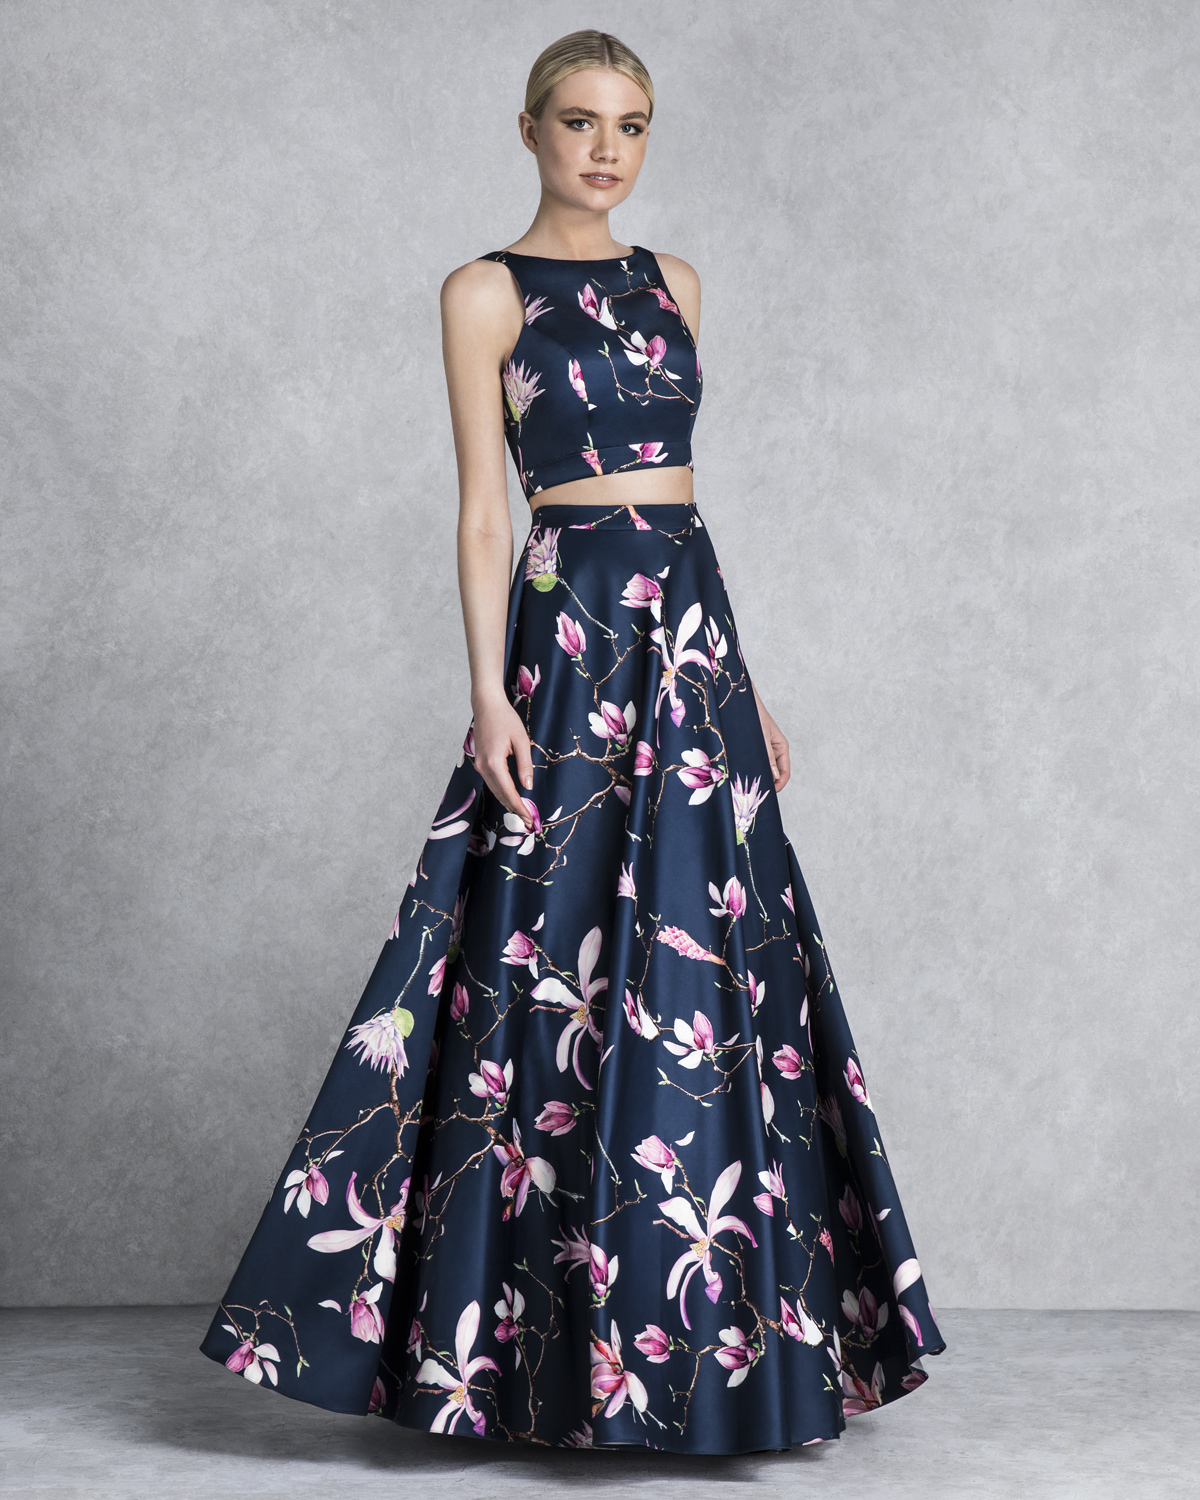 Cocktail Dresses / Long floral skirt with printed or solid color top